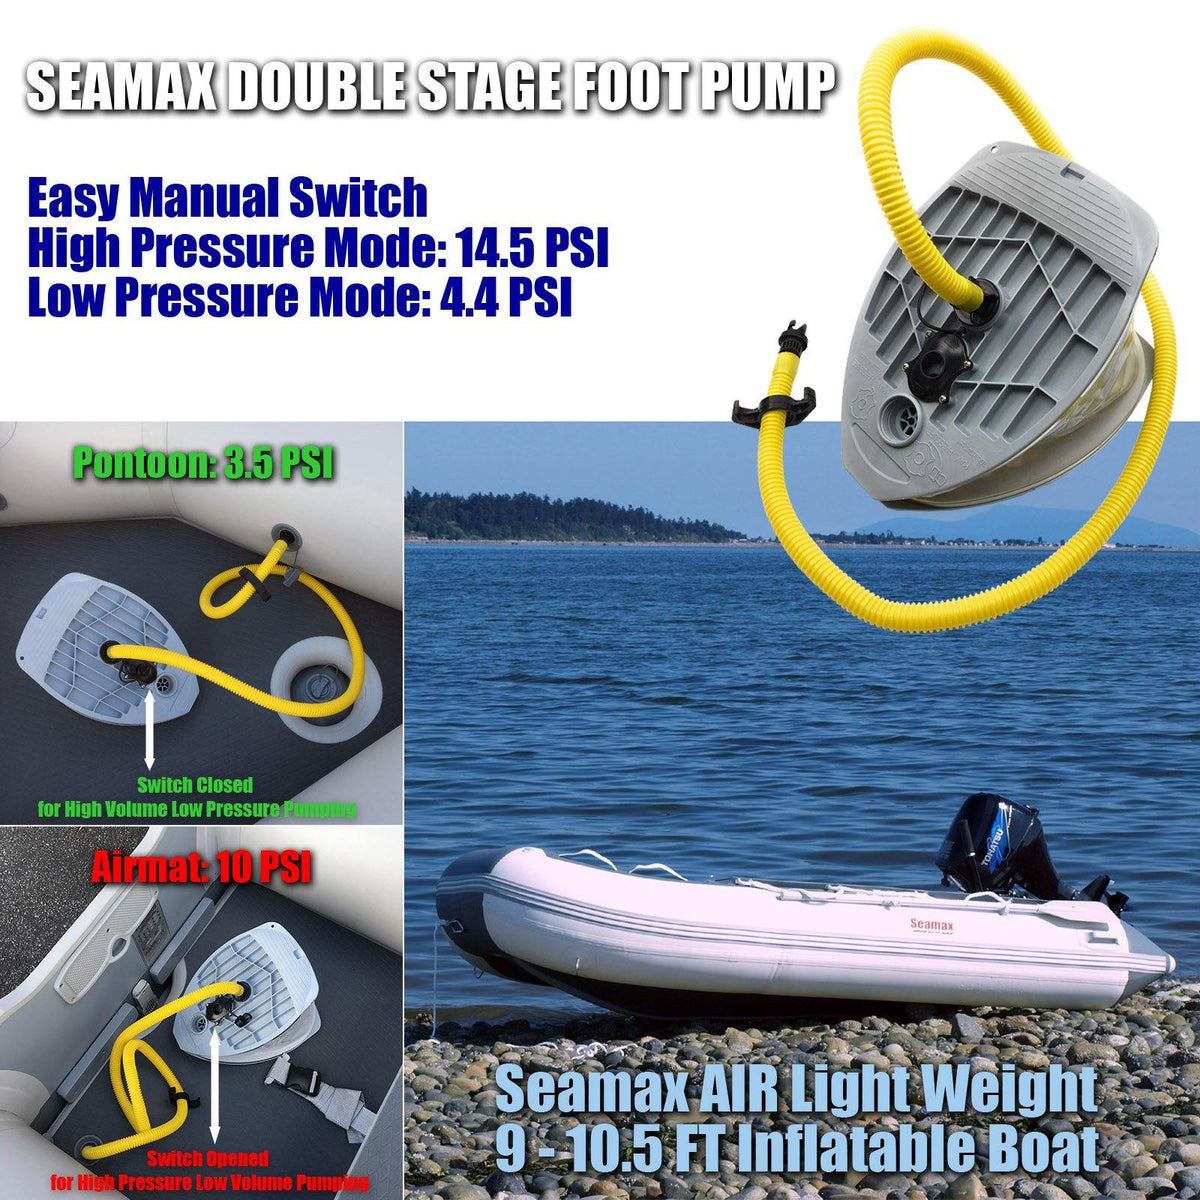 Portable Analog Manometer Air Pressure Gauge for Inflatable Boats or S -  Seamax Marine